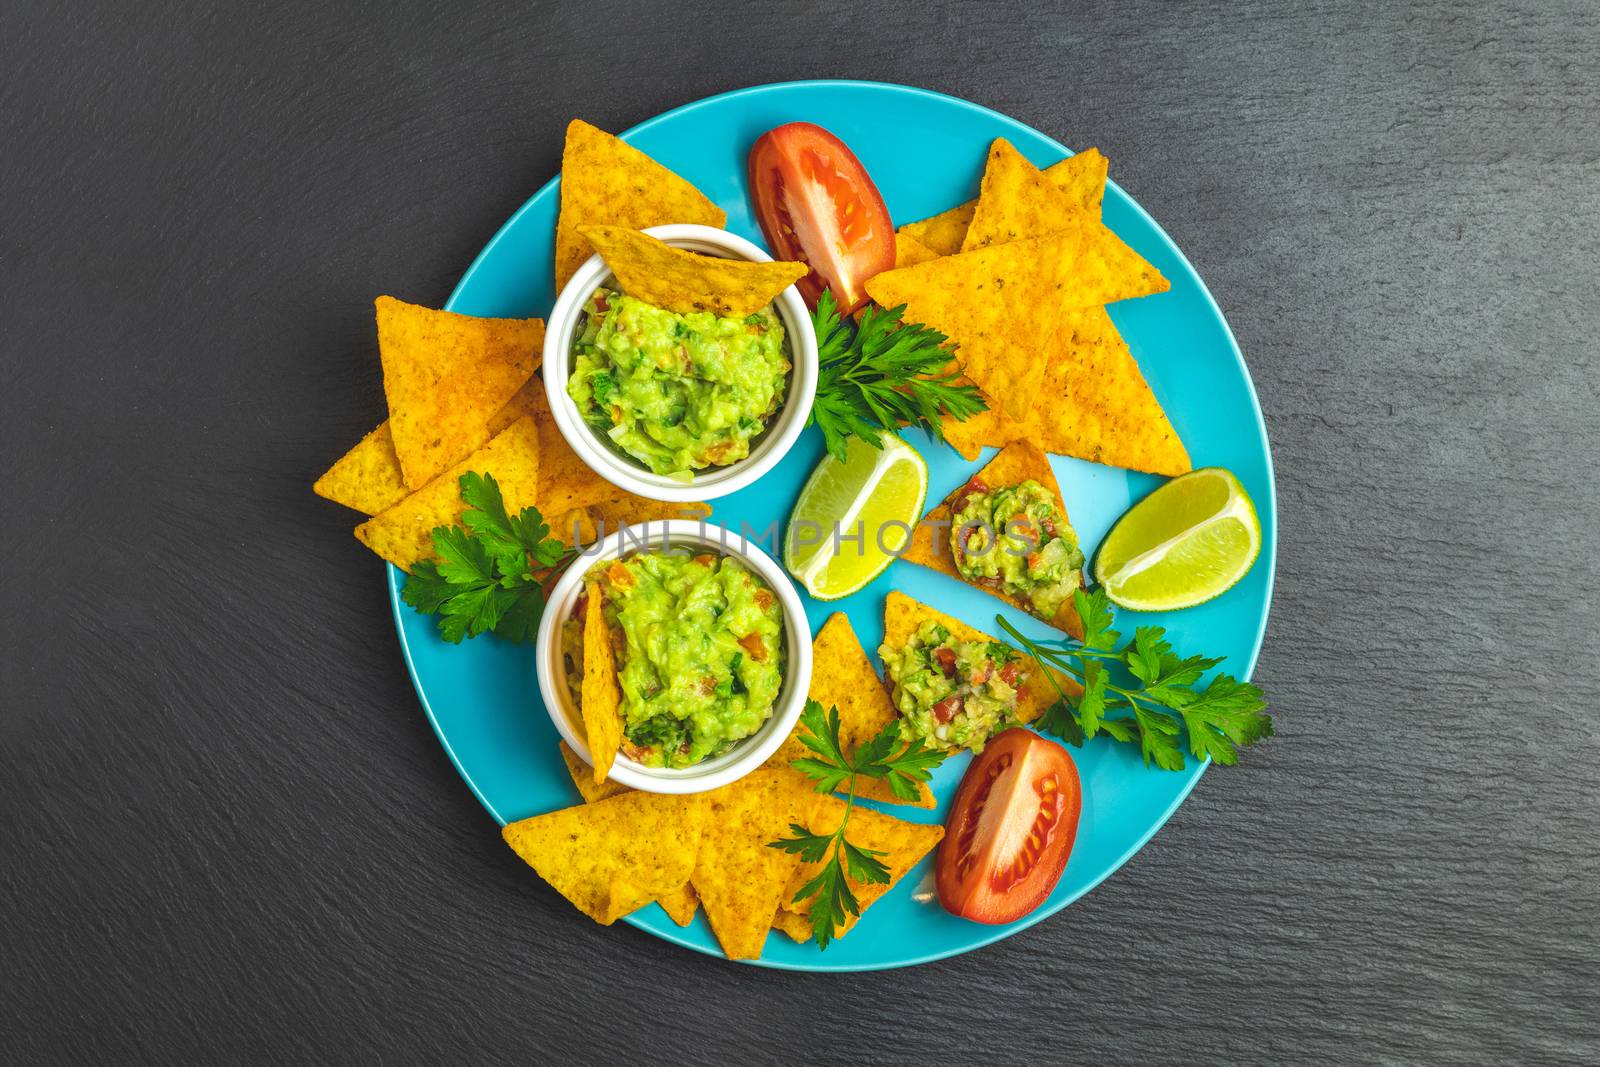 Guacamole and nachos with ingredients in the blue plate on the background of a black stone board. Top view, copy space.